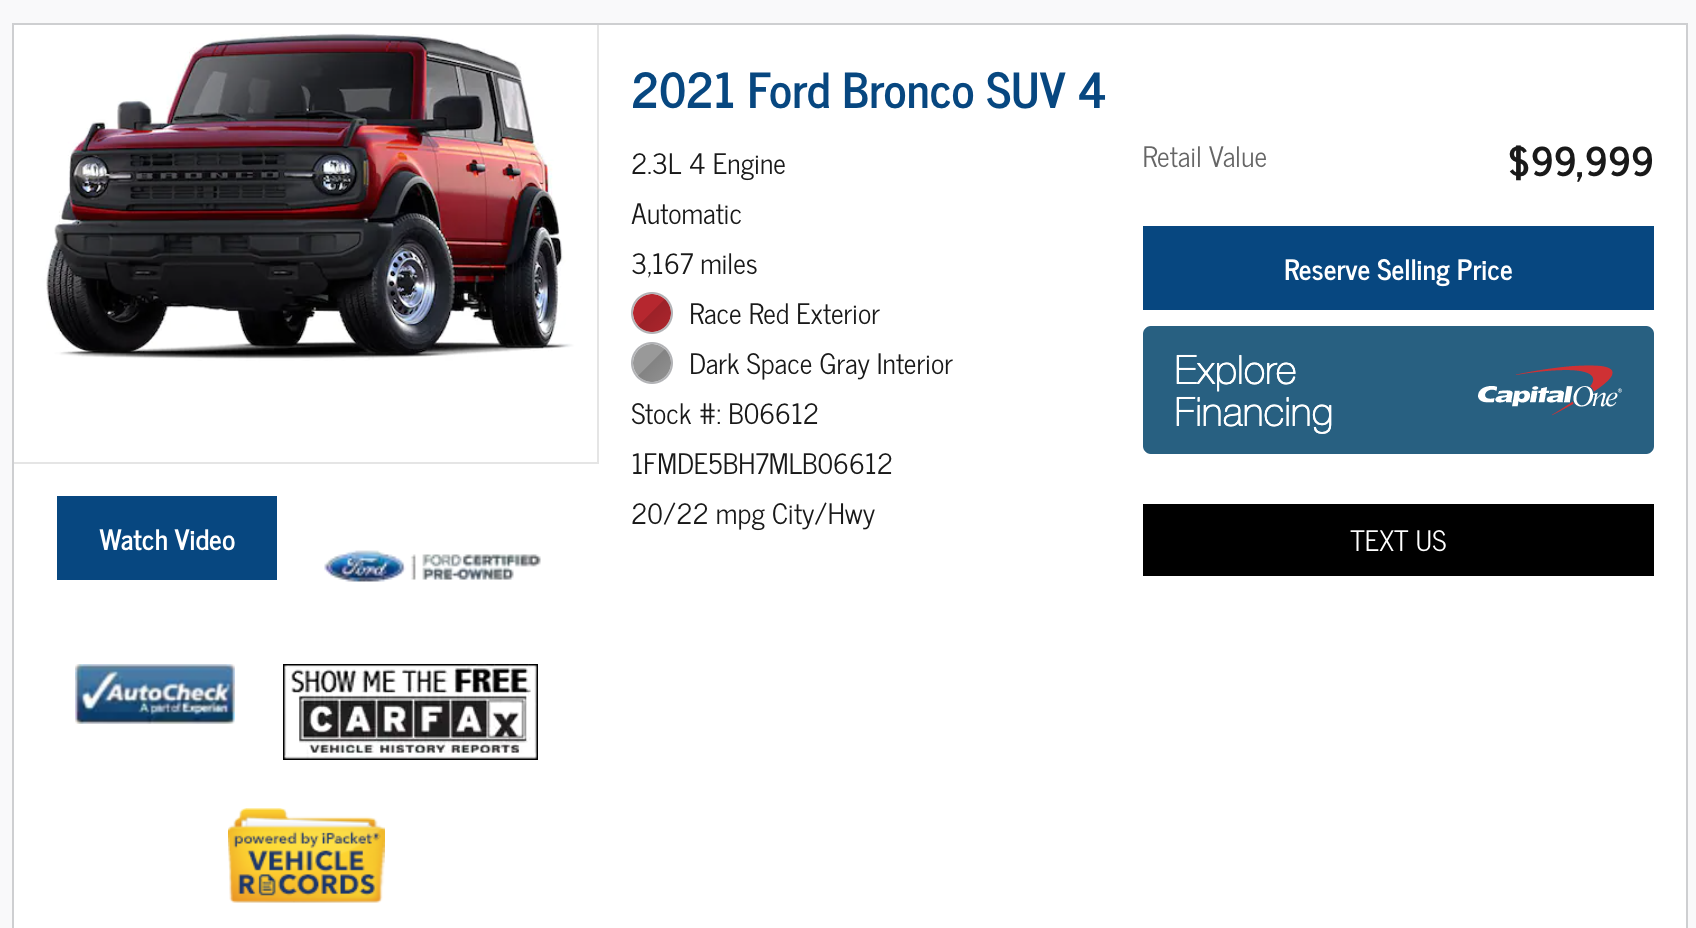 Ford Bronco Dealership in North Georgia with 10 Broncos on its lot Screen Shot 2022-02-24 at 5.20.50 PM